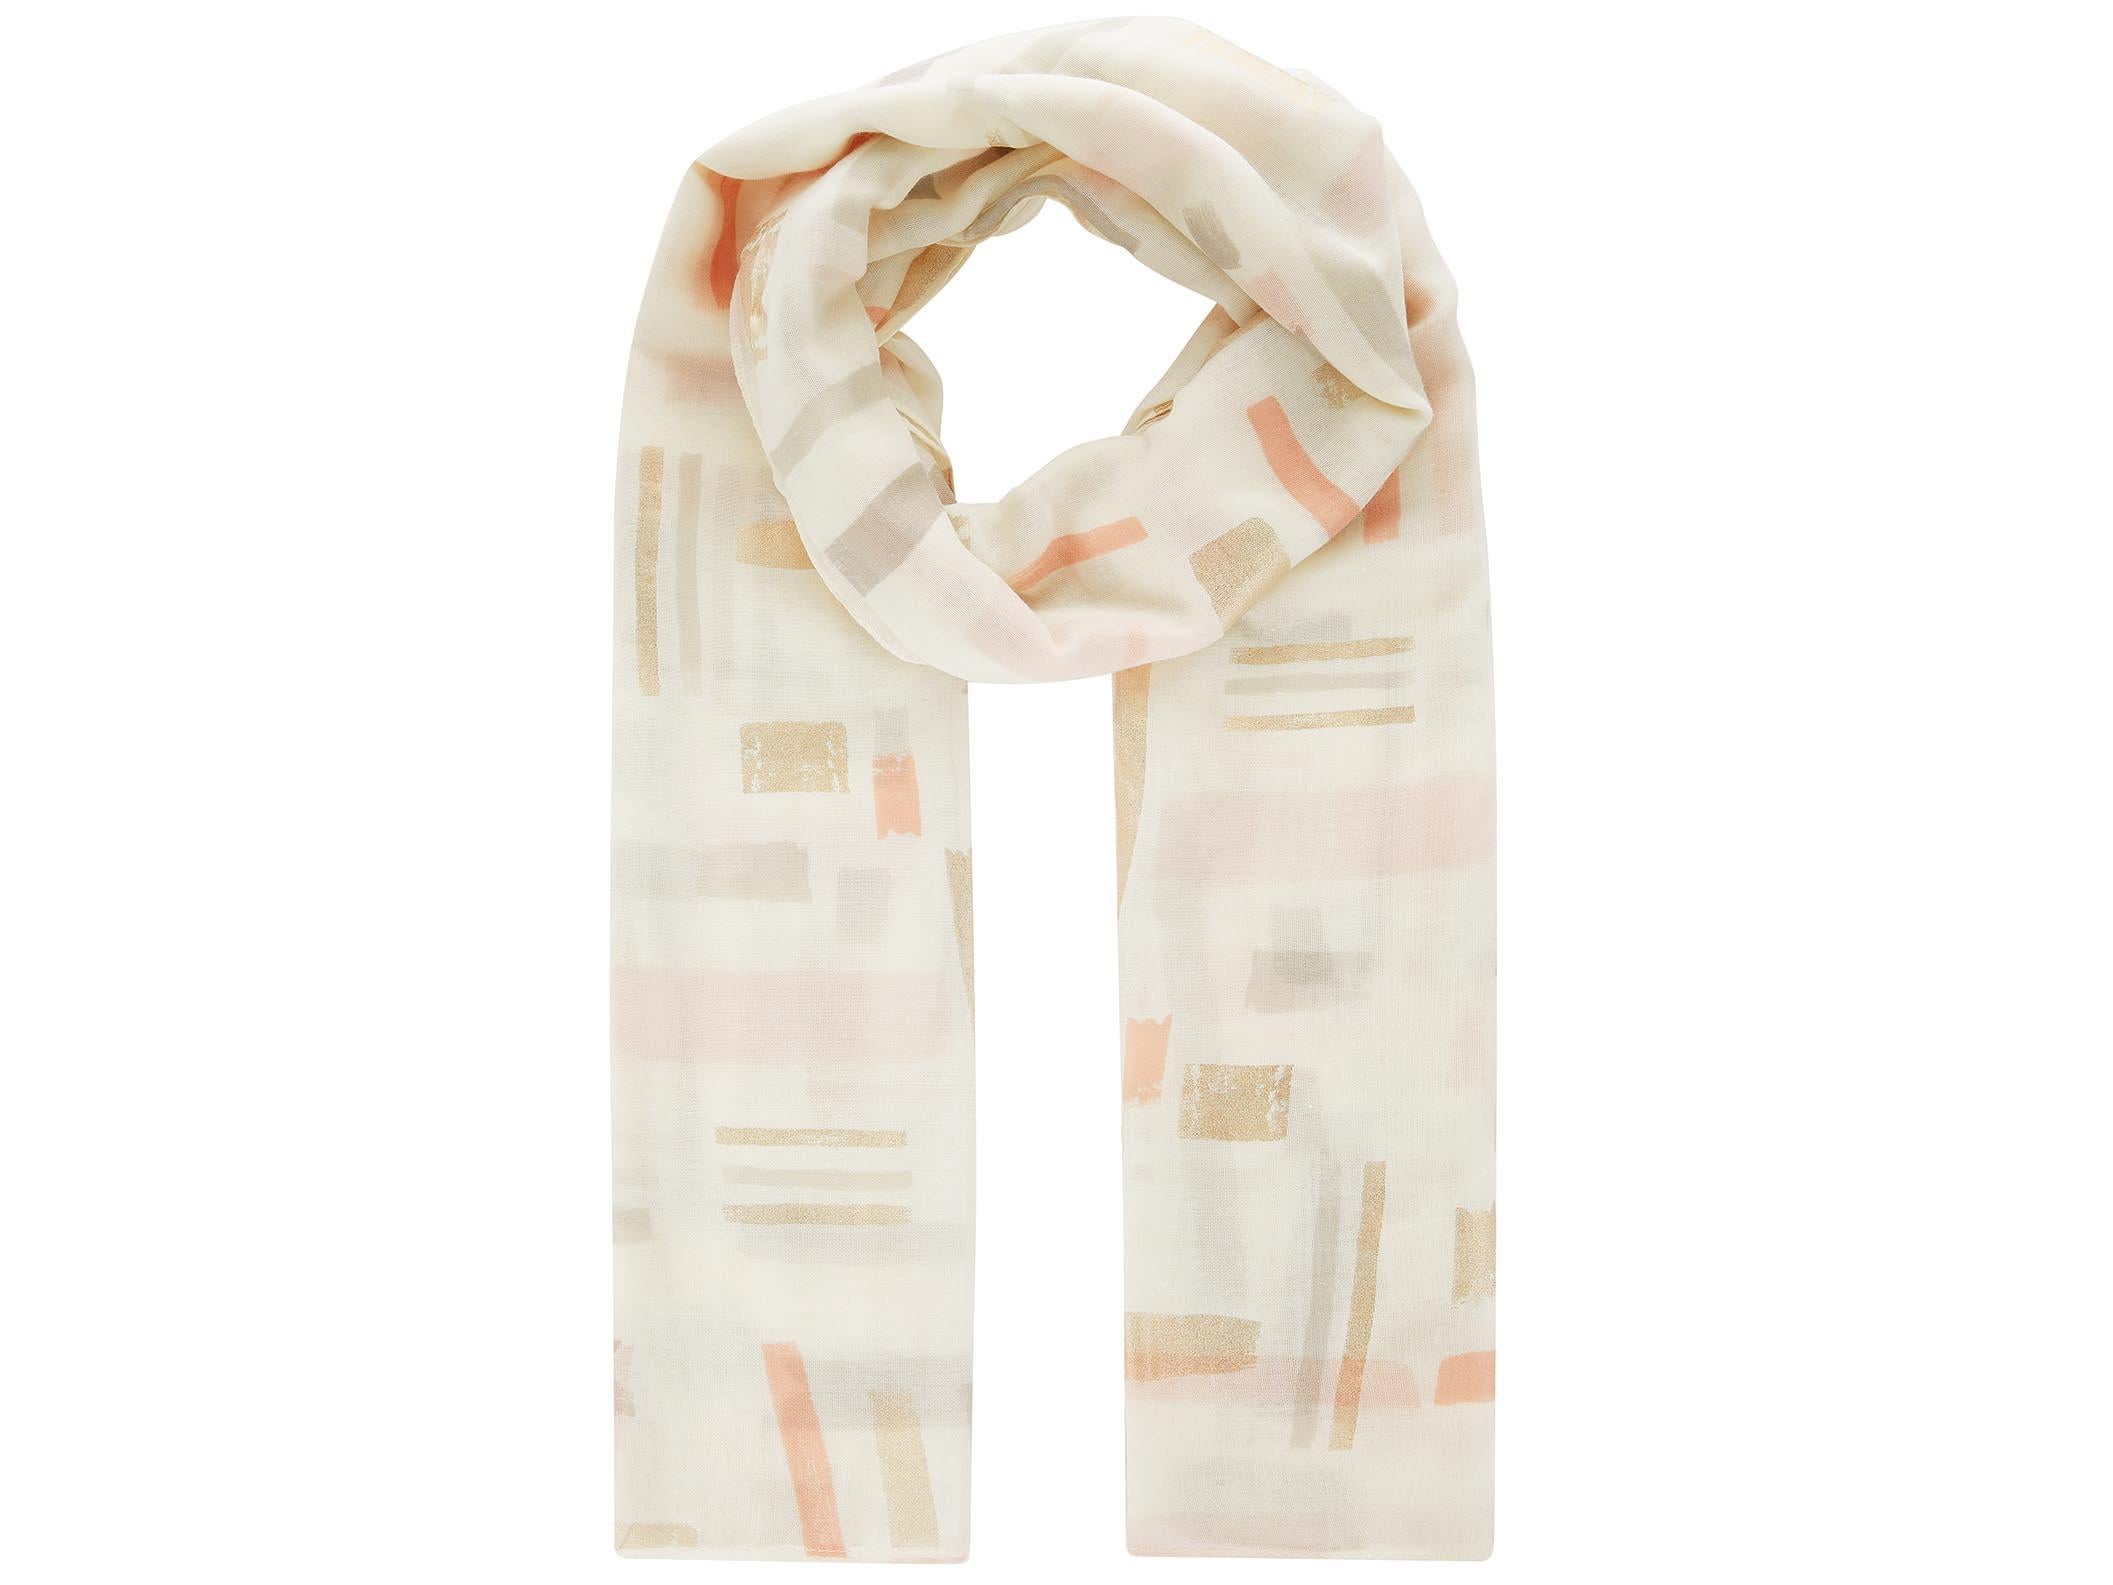 Abstract Geo Foil Print Scarf, £18, Accessorize